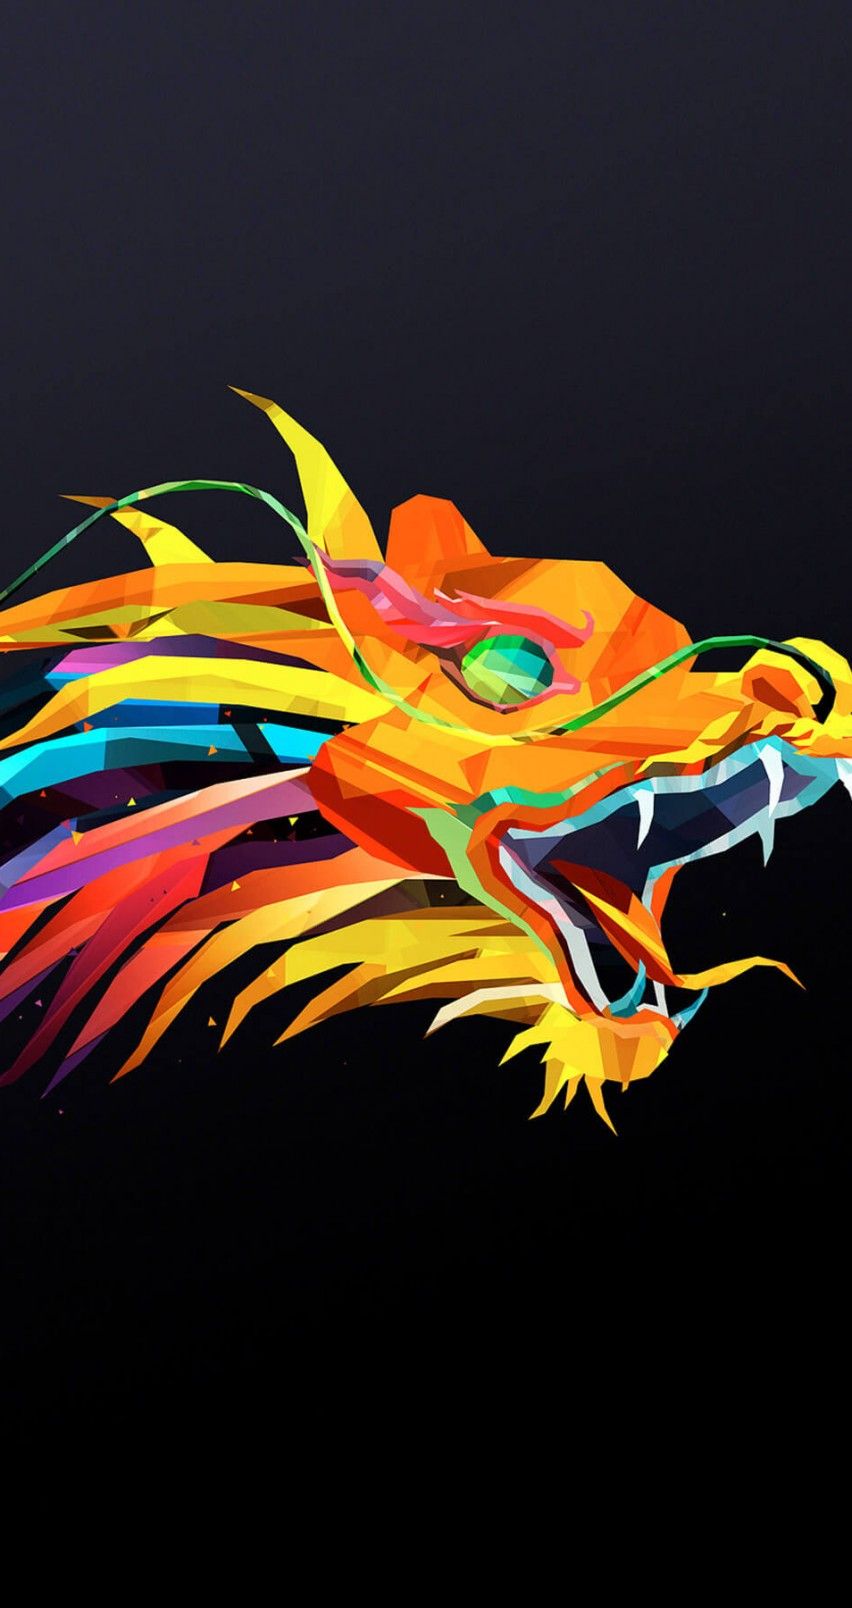 Free download Download The Dragon HD wallpaper for iPhone 6 6s